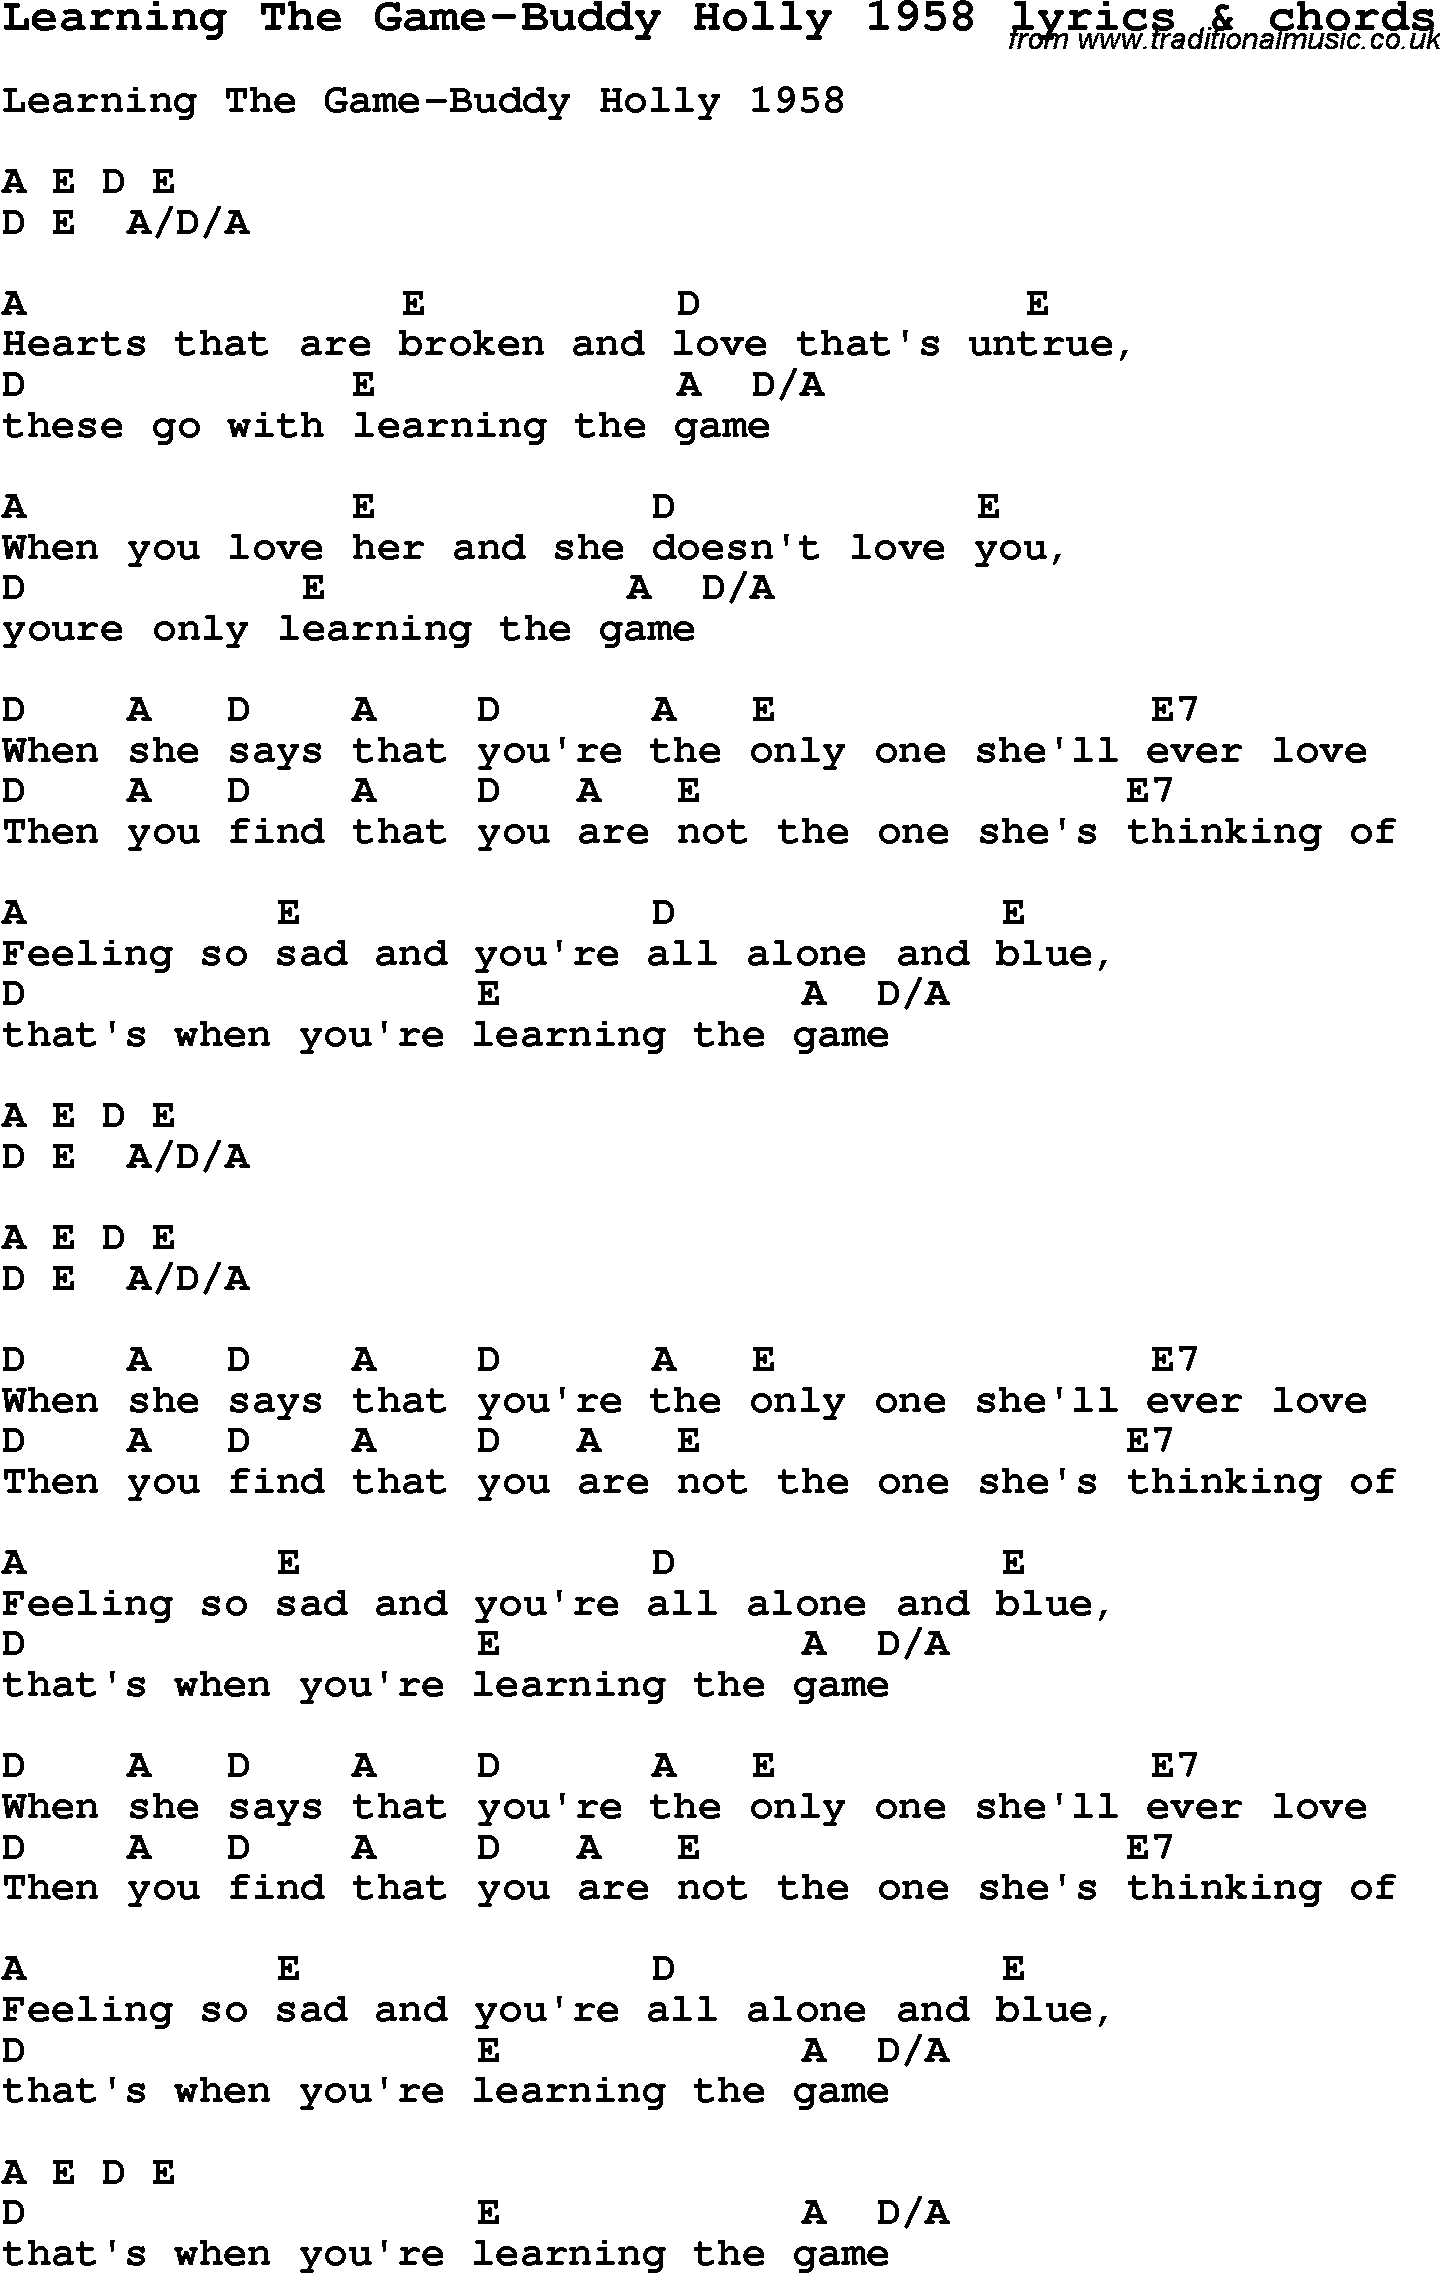 Love Song Lyrics for: Learning The Game-Buddy Holly 1958 with chords for Ukulele, Guitar Banjo etc.